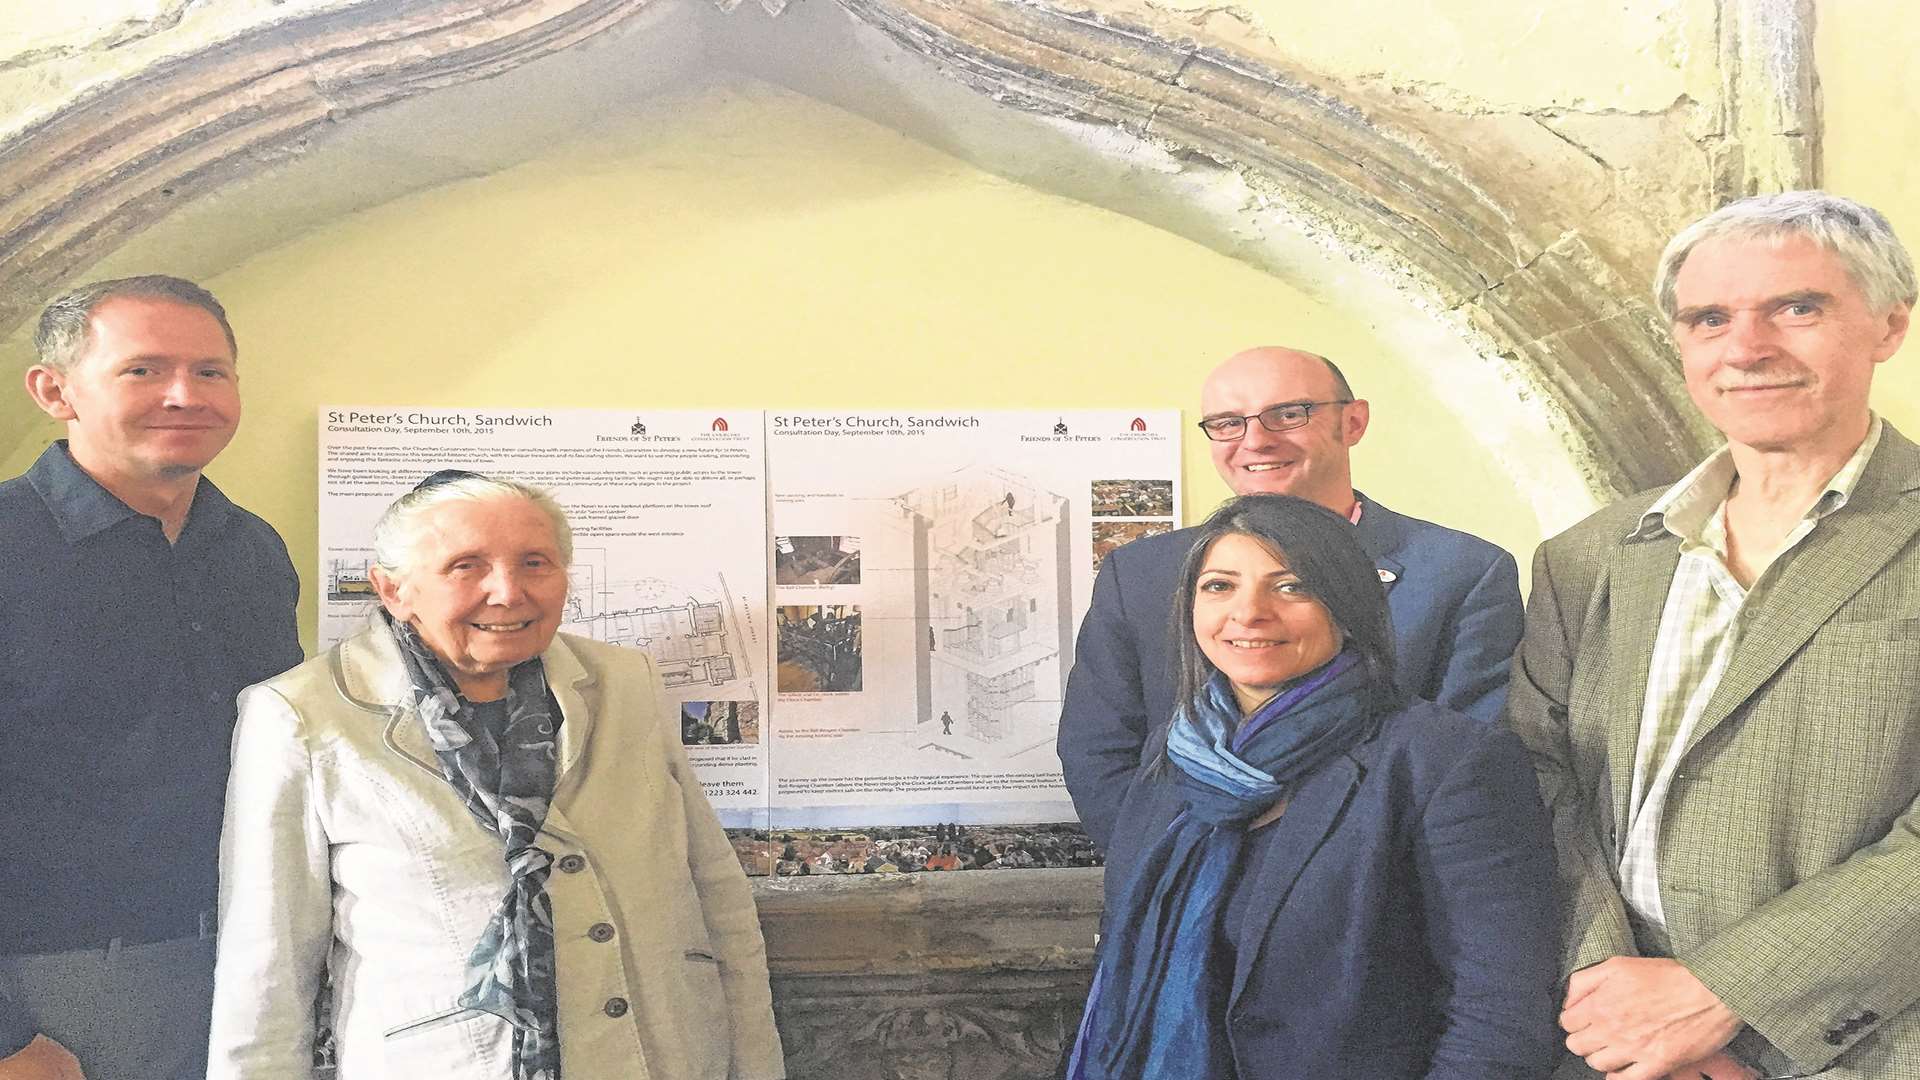 Consultation helps plans to open up St Peter’s Church tower move forward